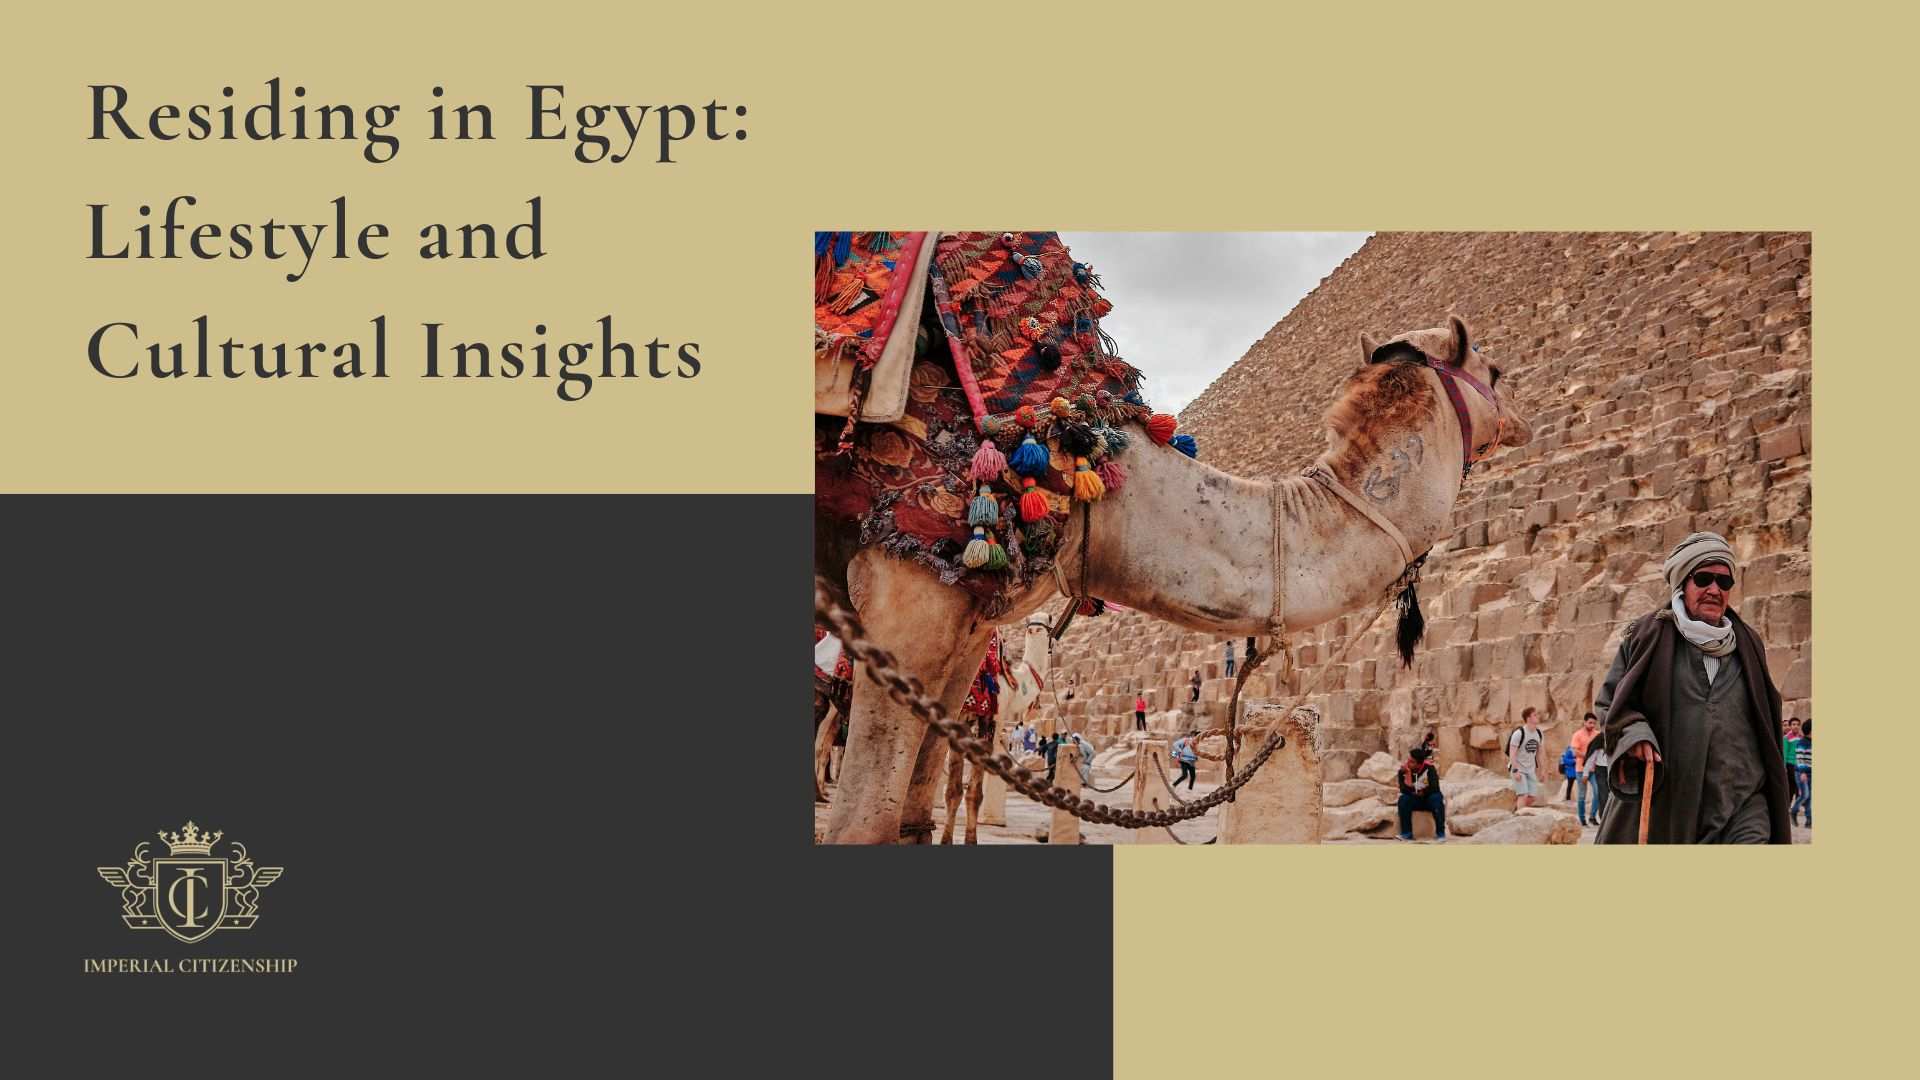 Lifestyle and Cultural Insights of Egypt